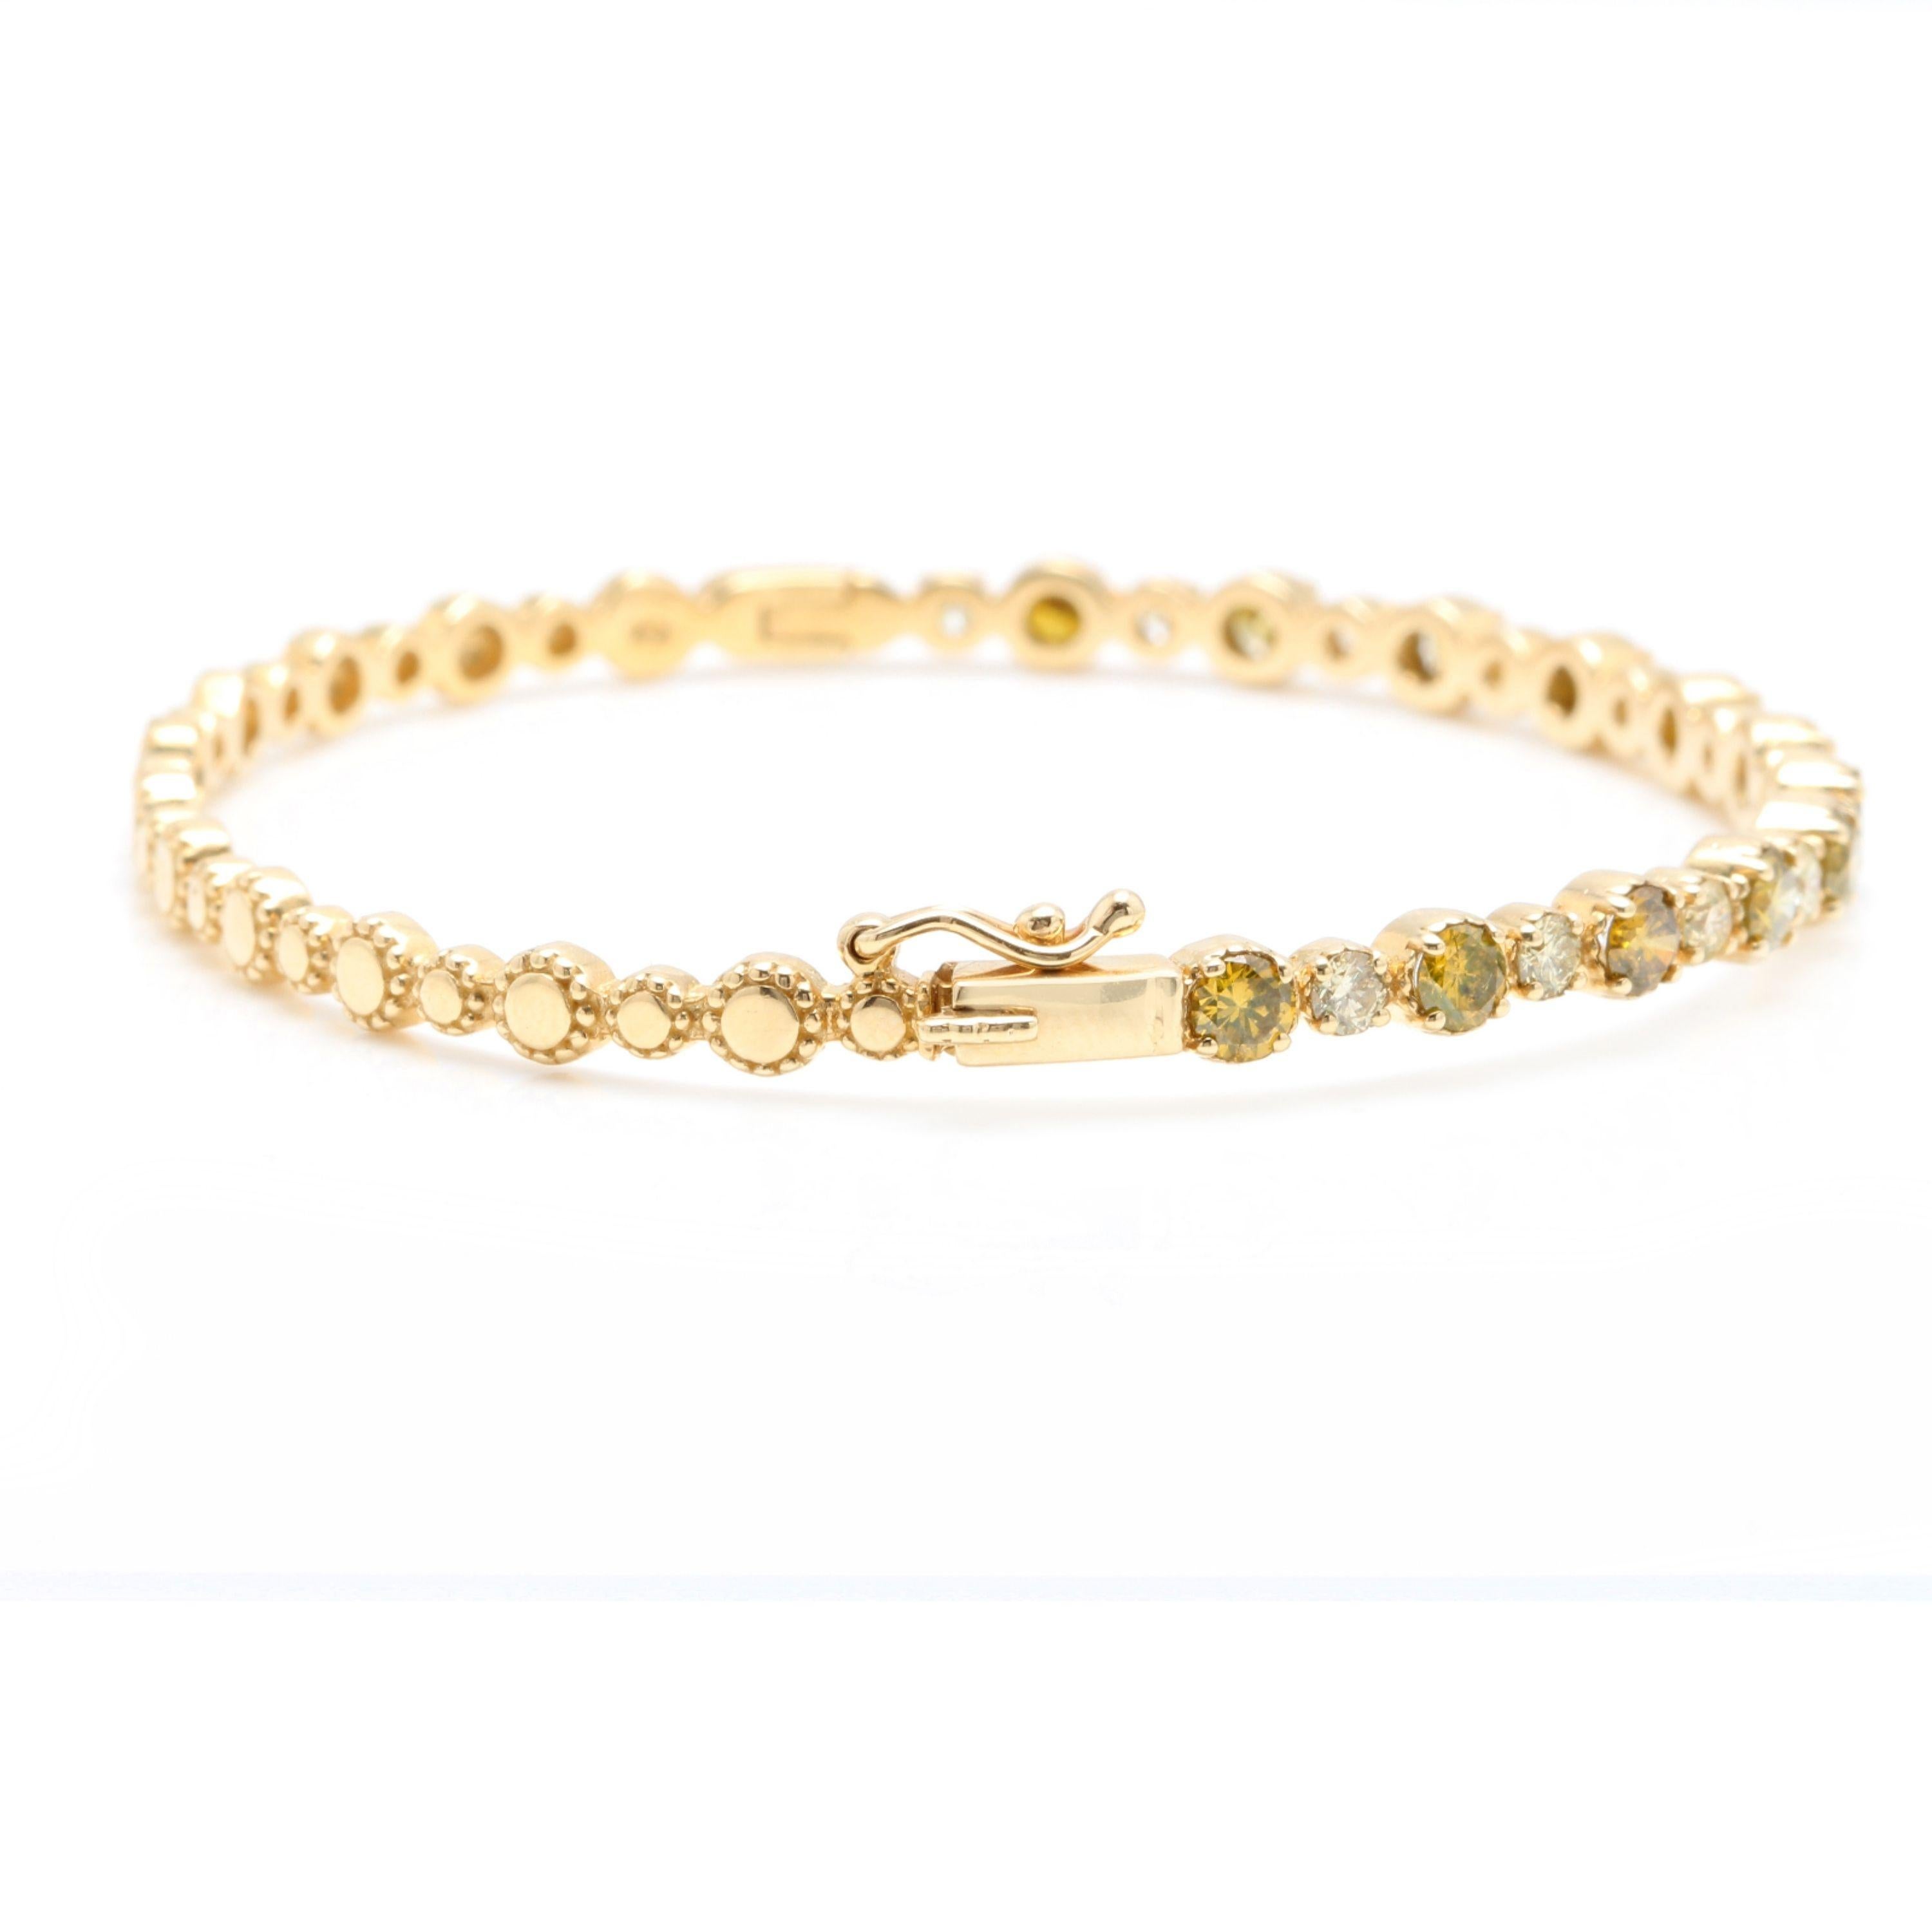 1.84 Carat Natural Fancy Color Diamond 14K Solid Yellow Gold Bangle Bracelet In New Condition For Sale In Los Angeles, CA